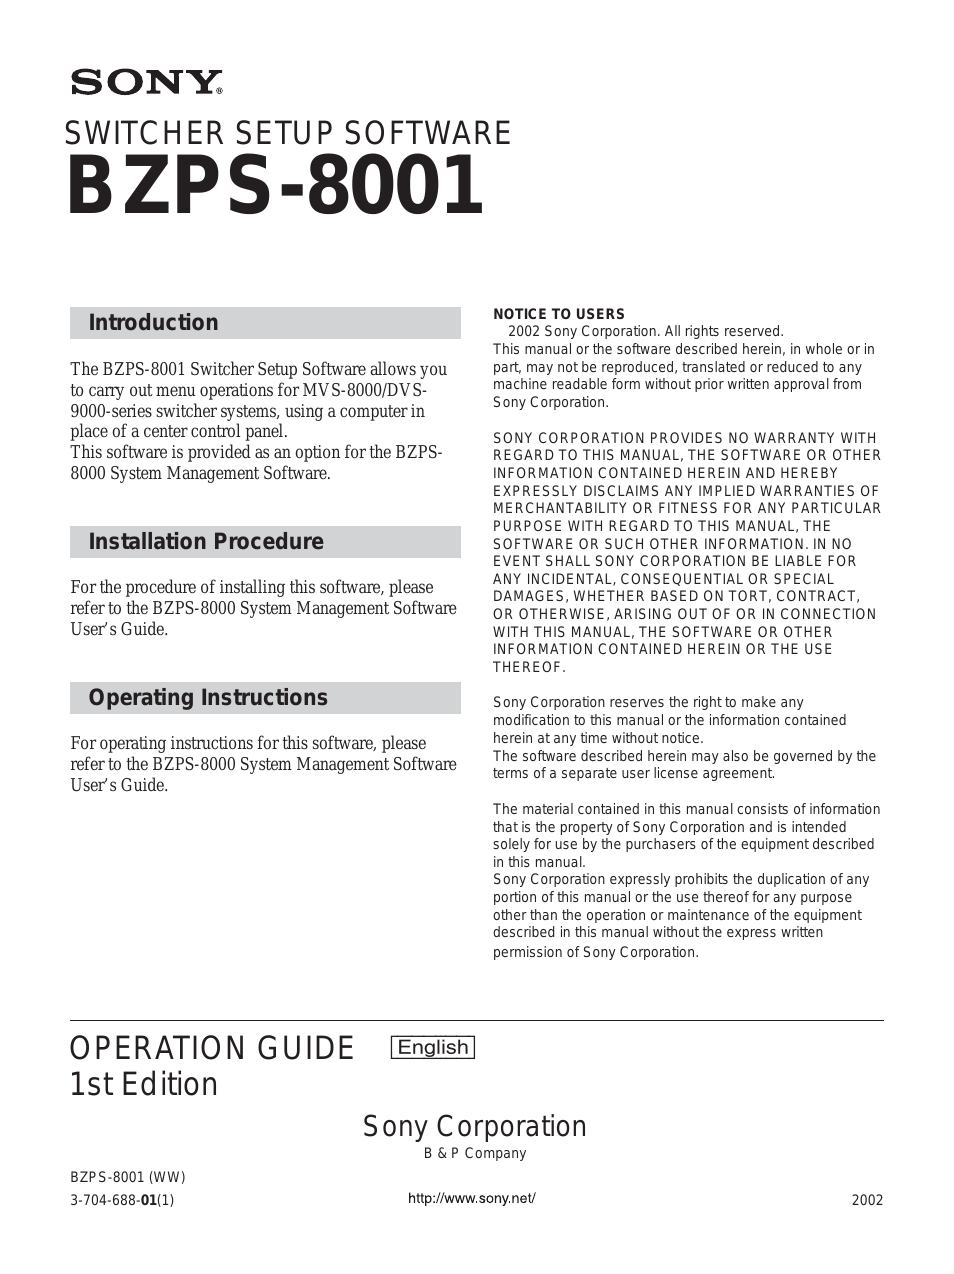 BZPS-8001